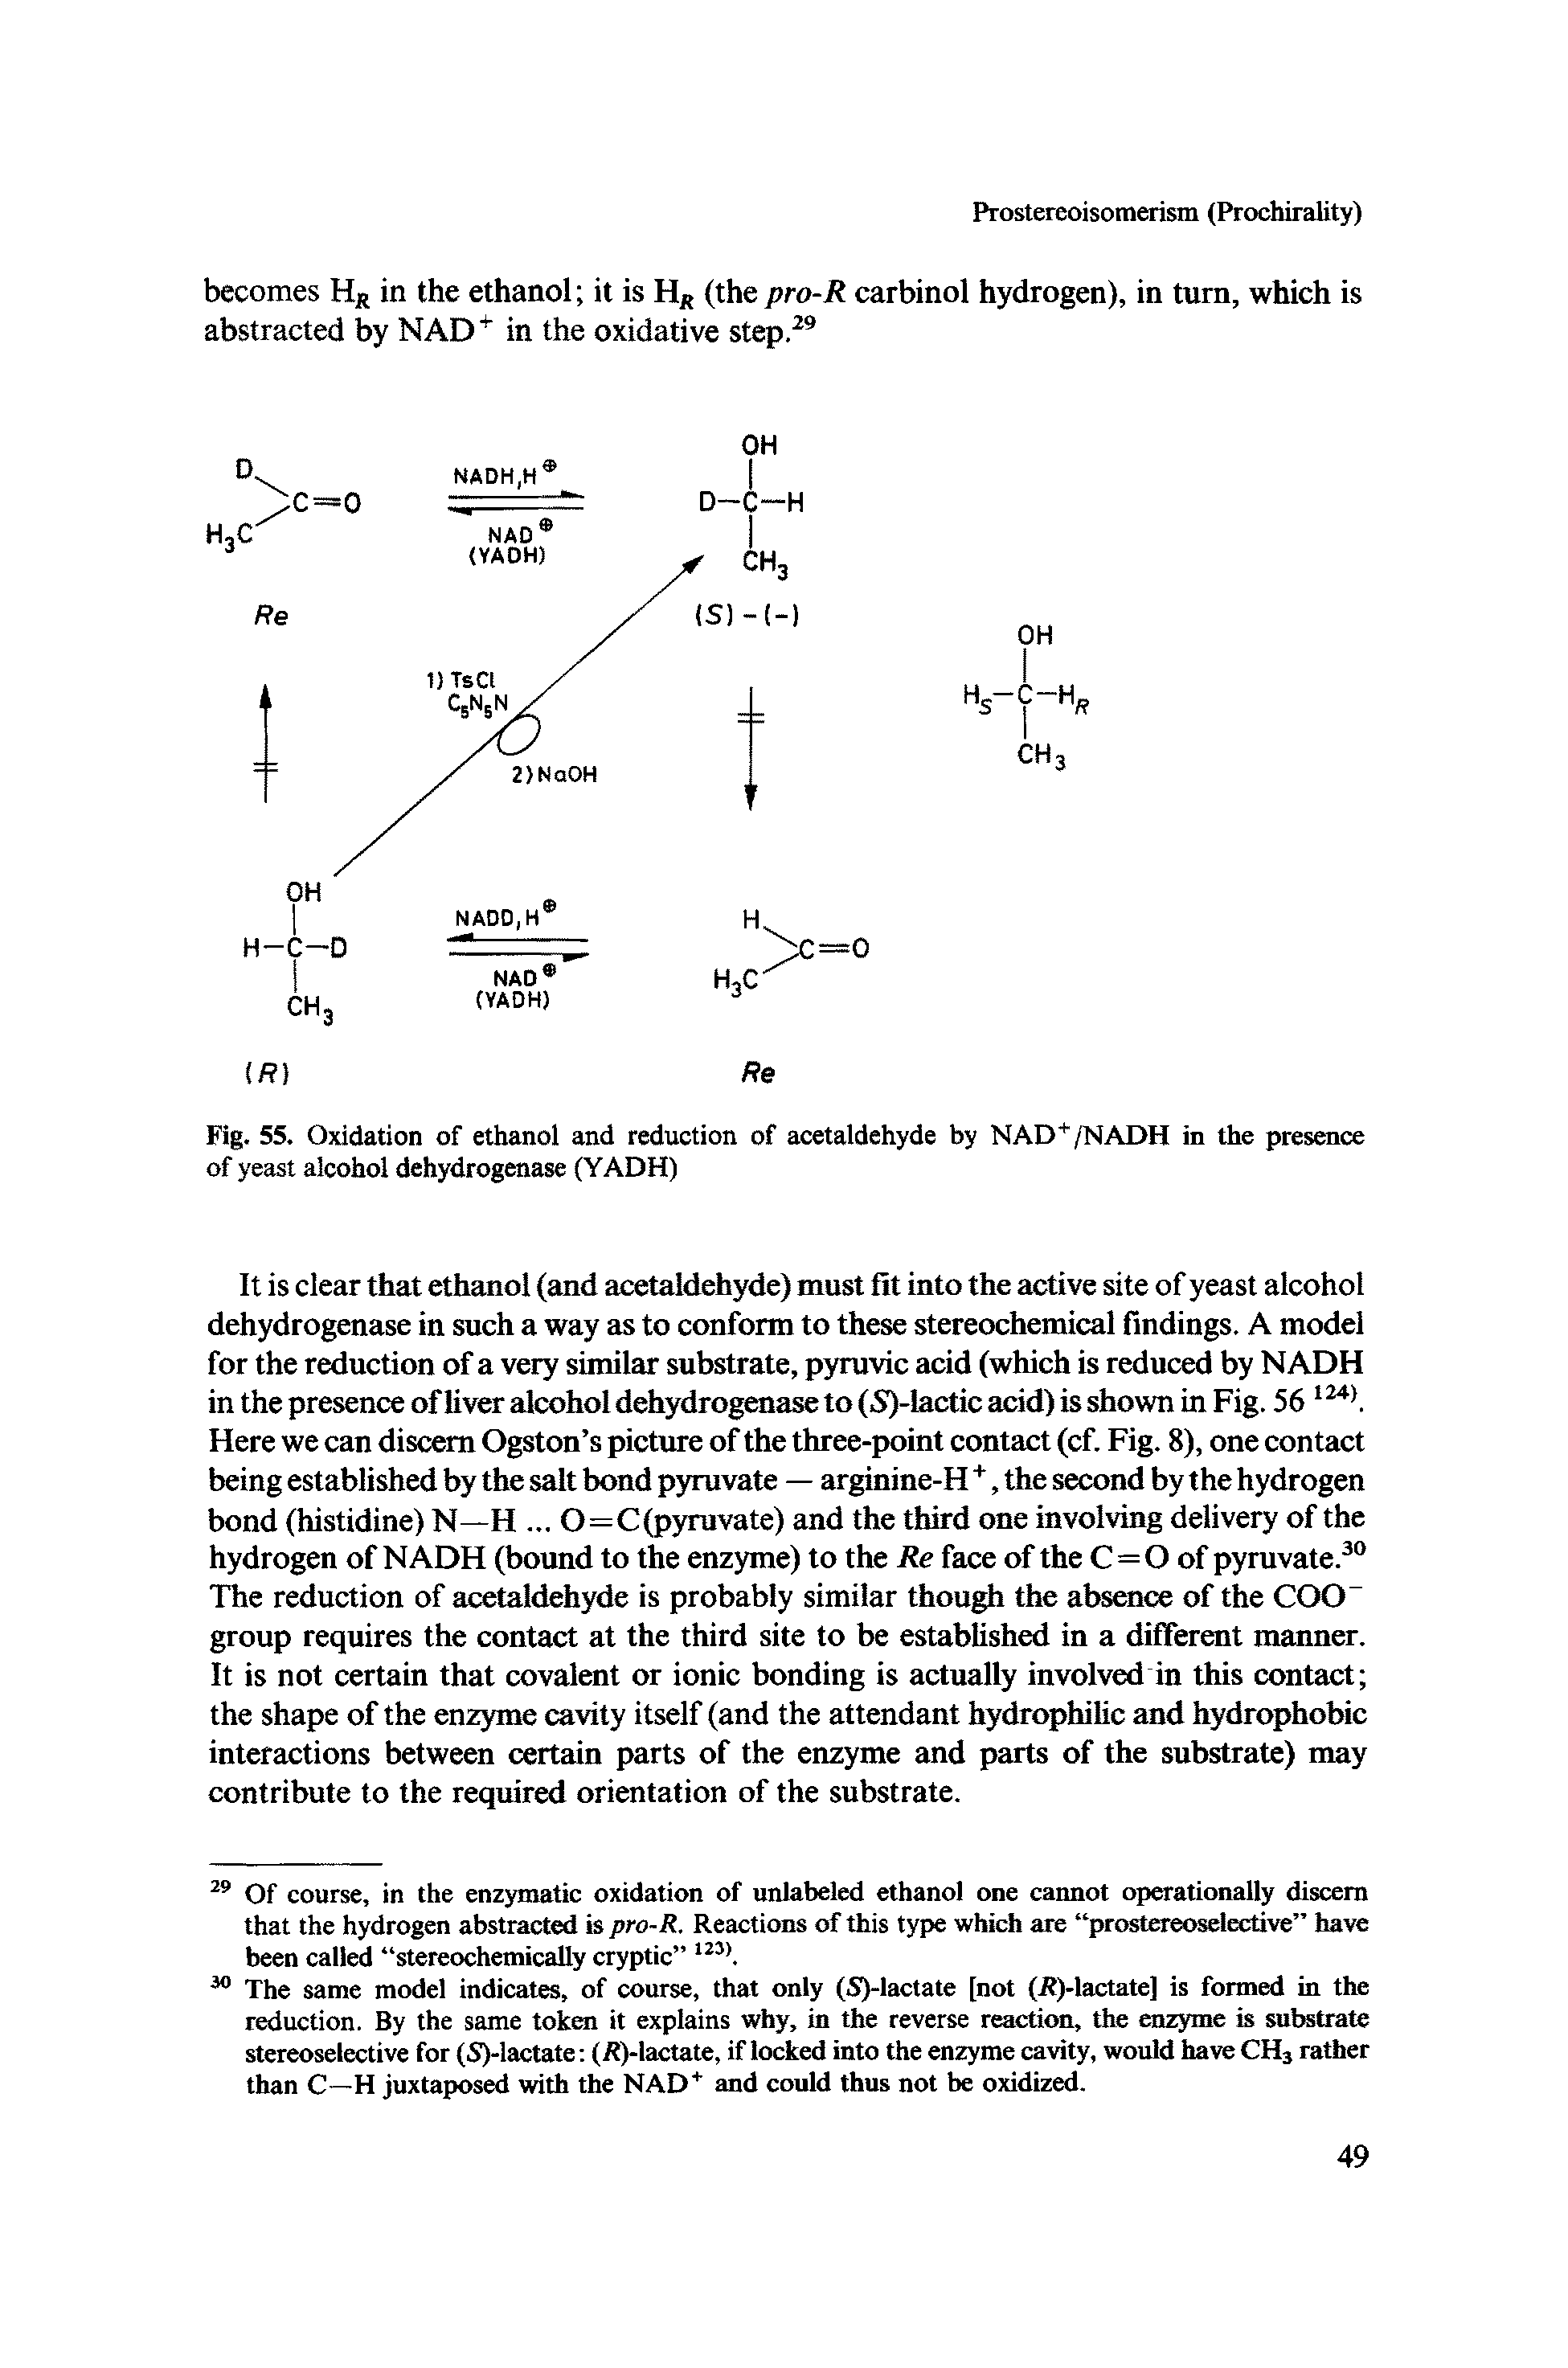 Fig. 55. Oxidation of ethanol and reduction of acetaldehyde by NAD+/NADH in the presence of yeast alcohol dehydrogenase (YADH)...